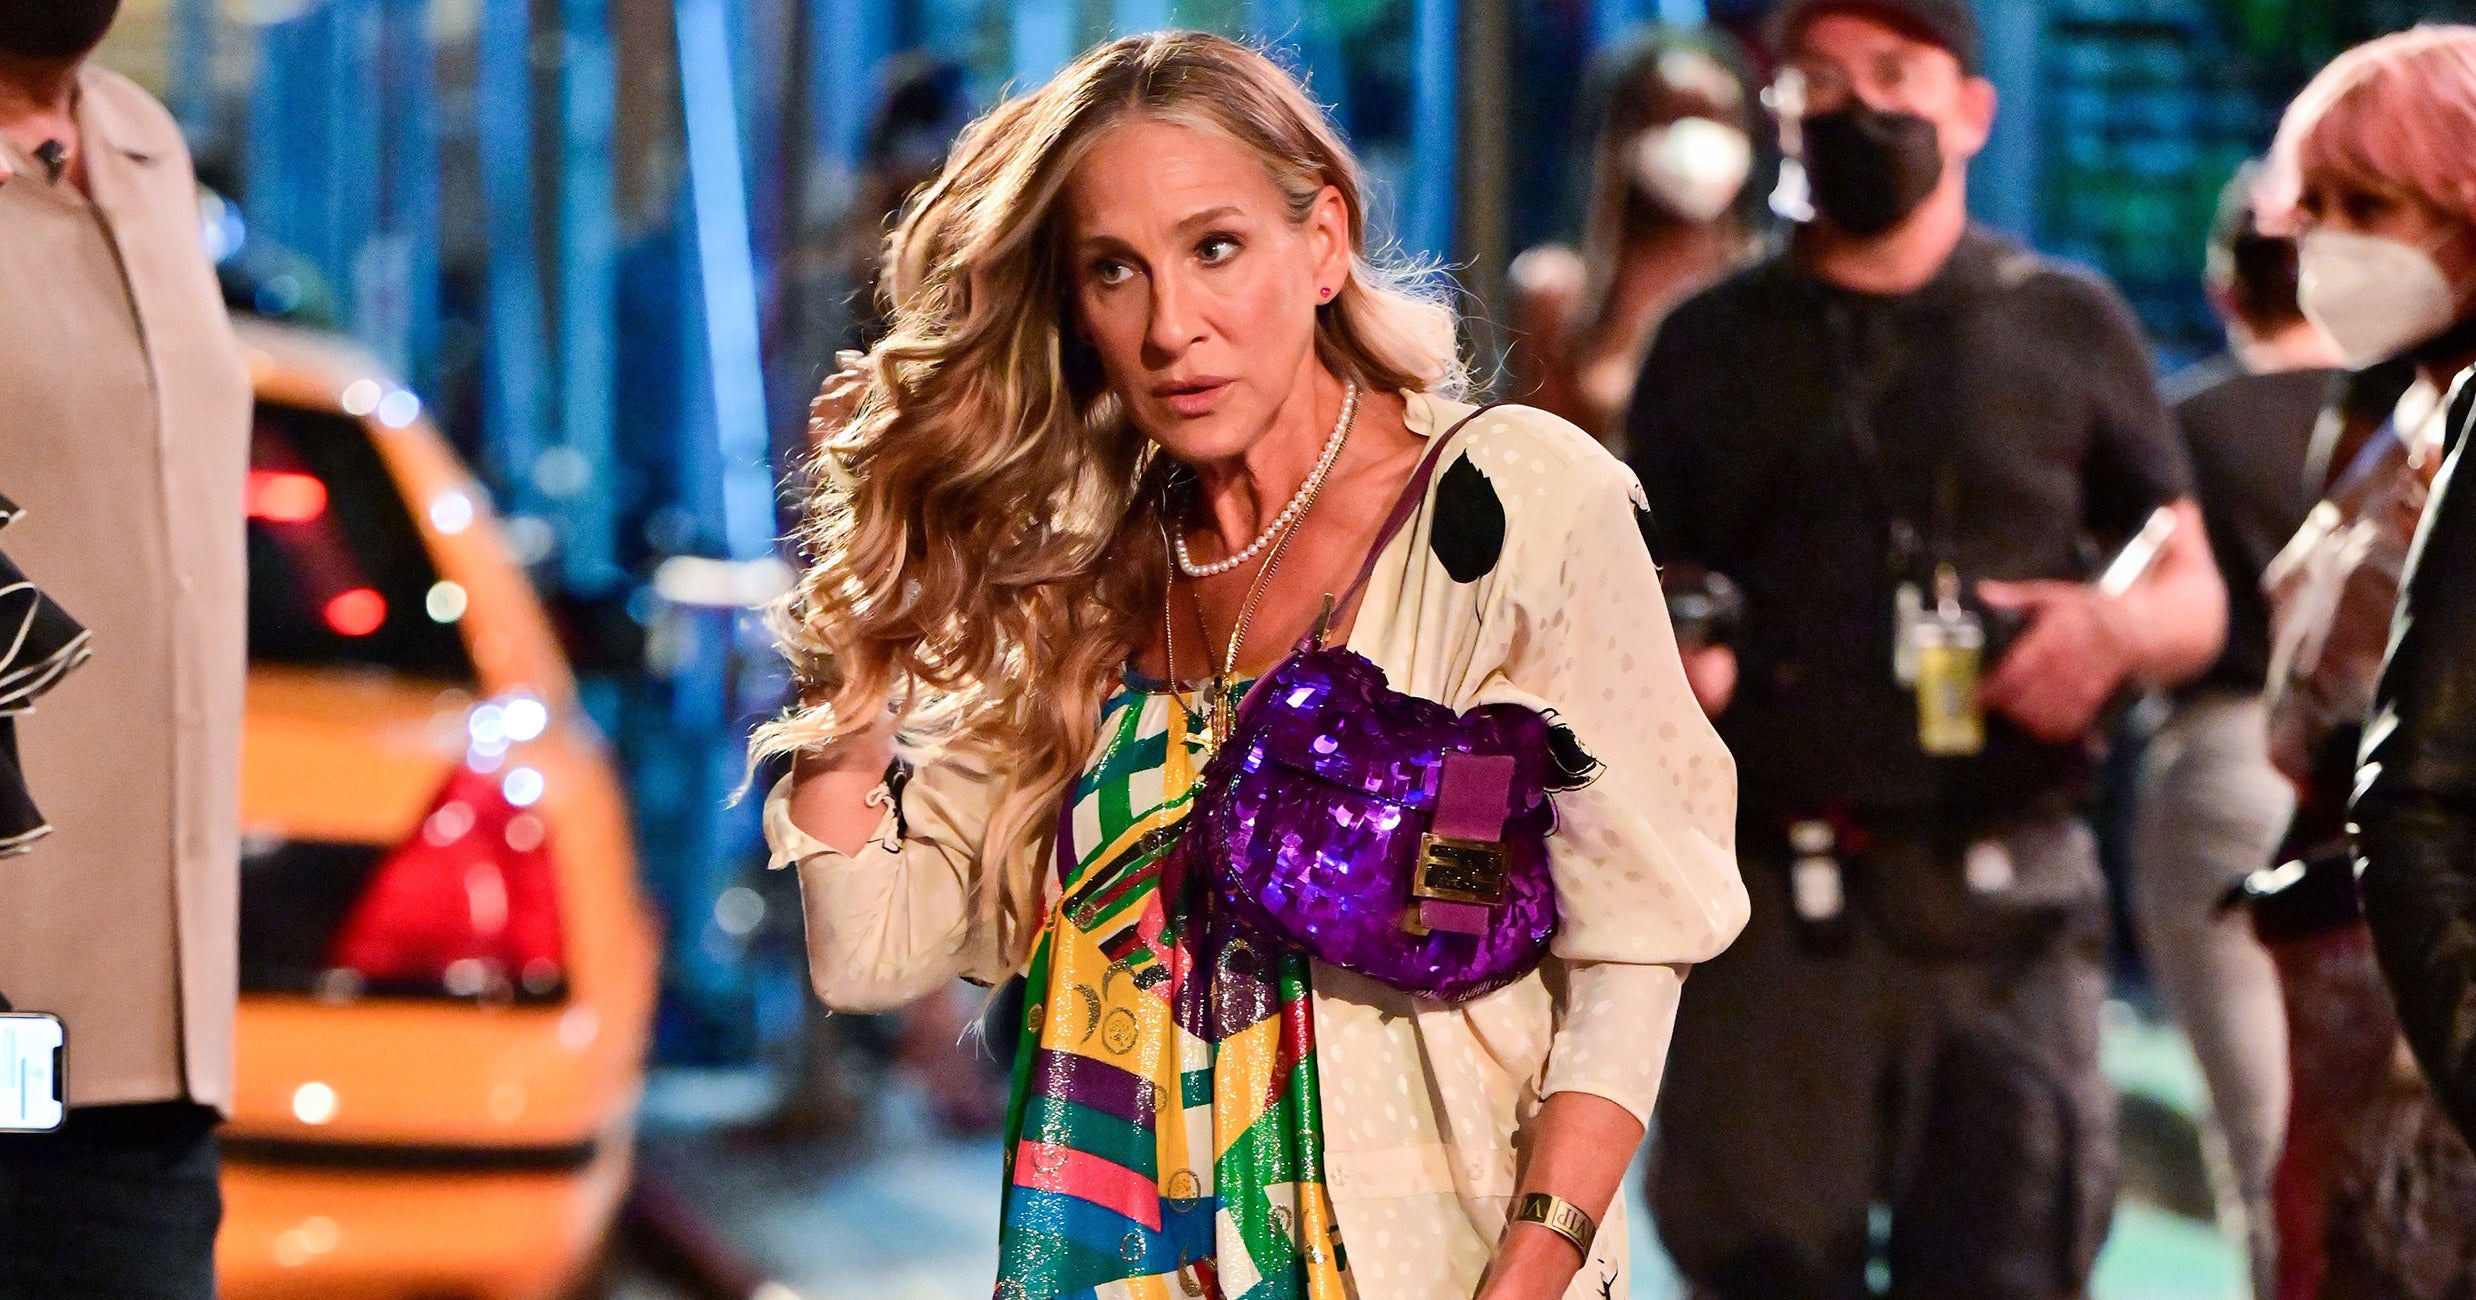 Carrie Bradshaw is Finally Spotted With a Major It Bag